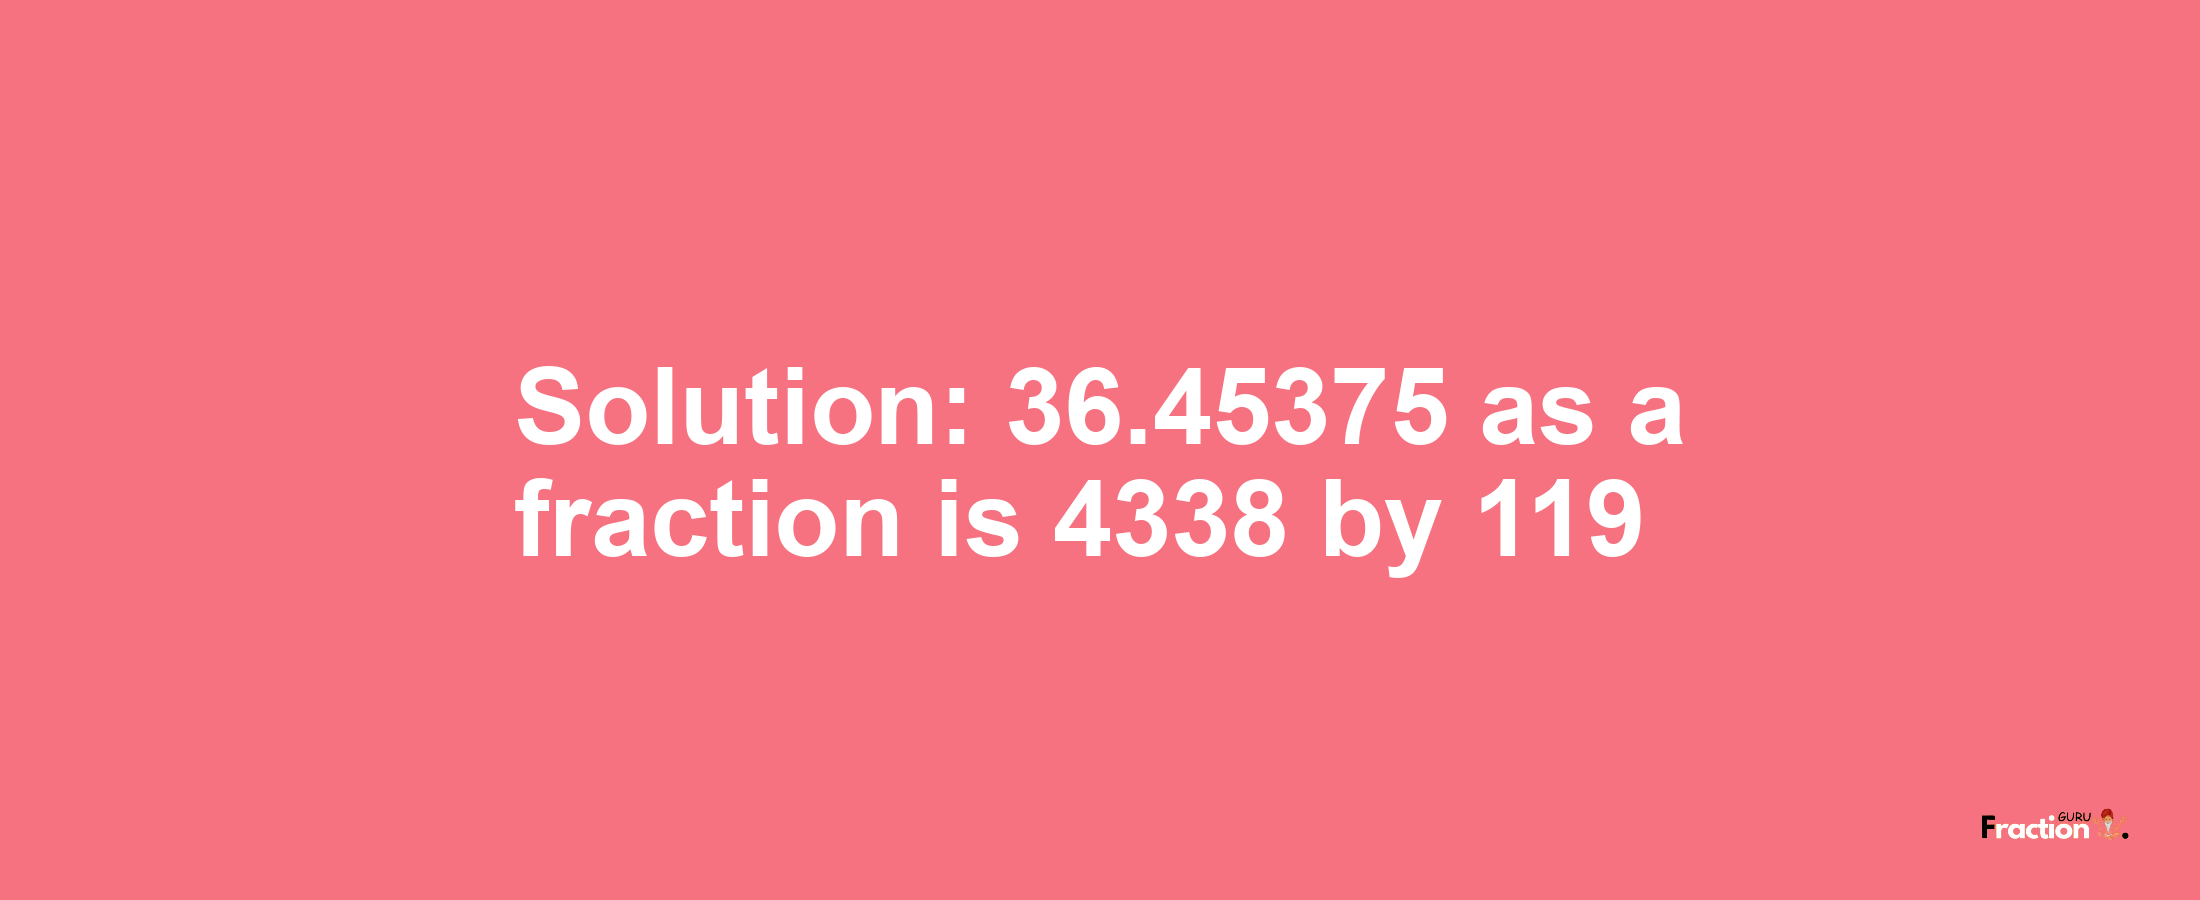 Solution:36.45375 as a fraction is 4338/119